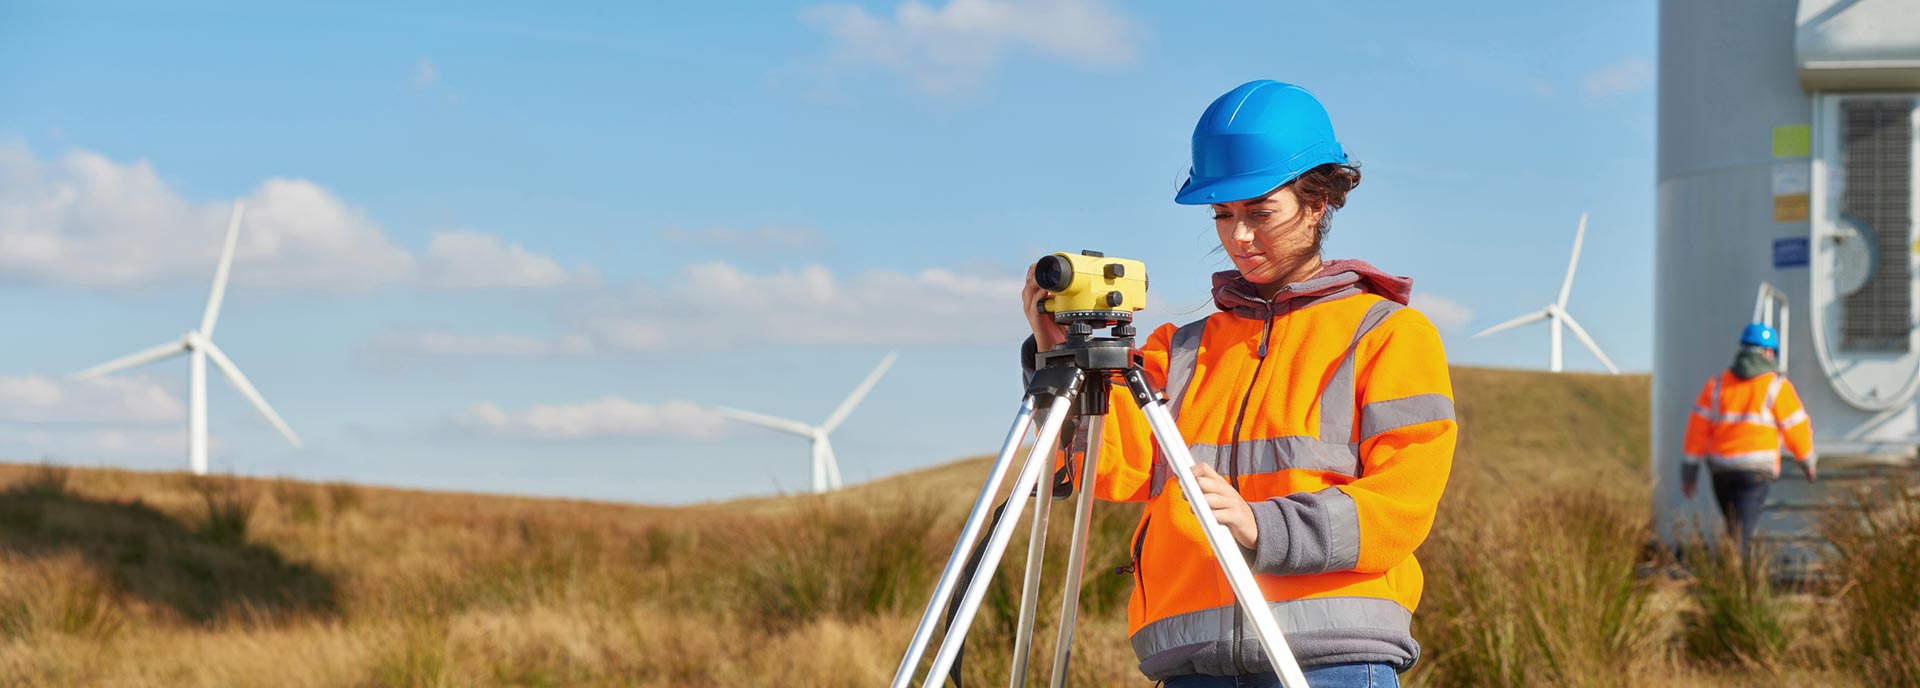 A surveyor with wind farm in background